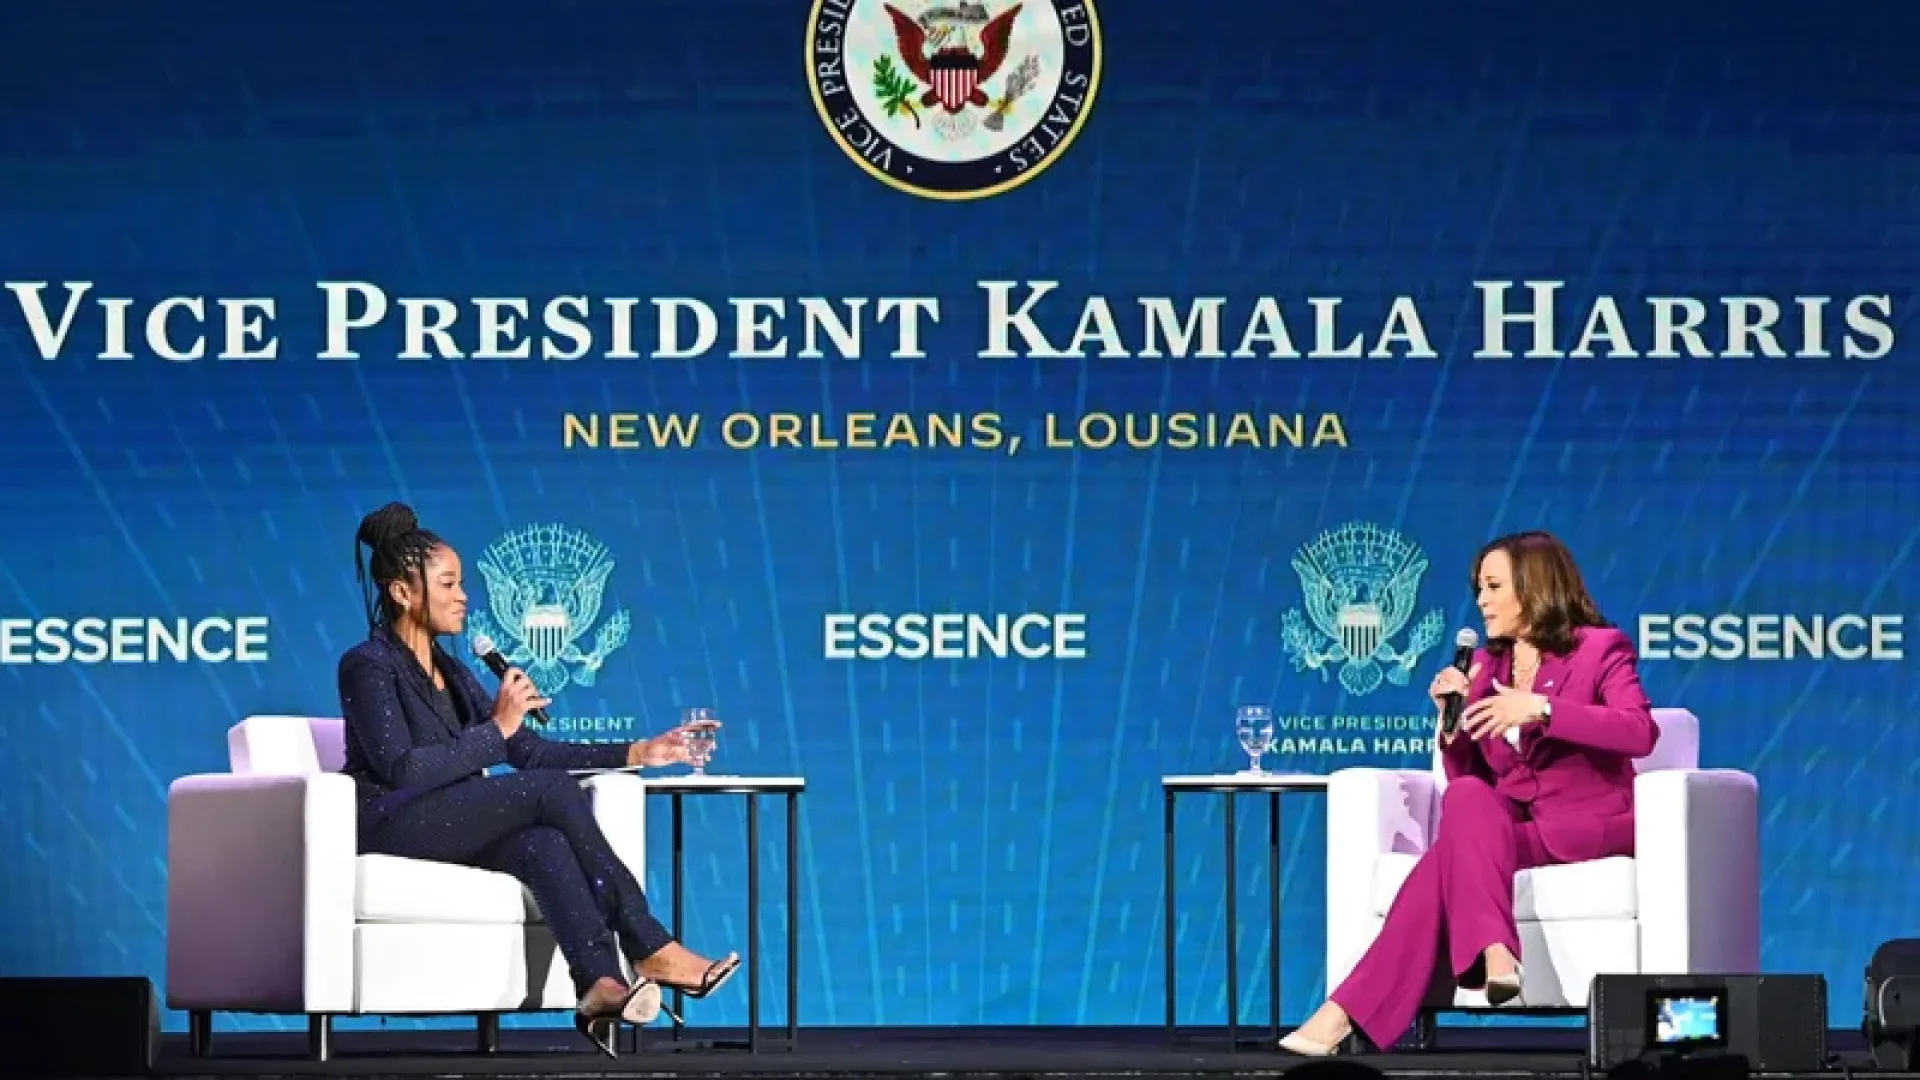 DNC Announce Return To ESSENCE Festival Of Culture With Major Black Voter Engagement Initiative   